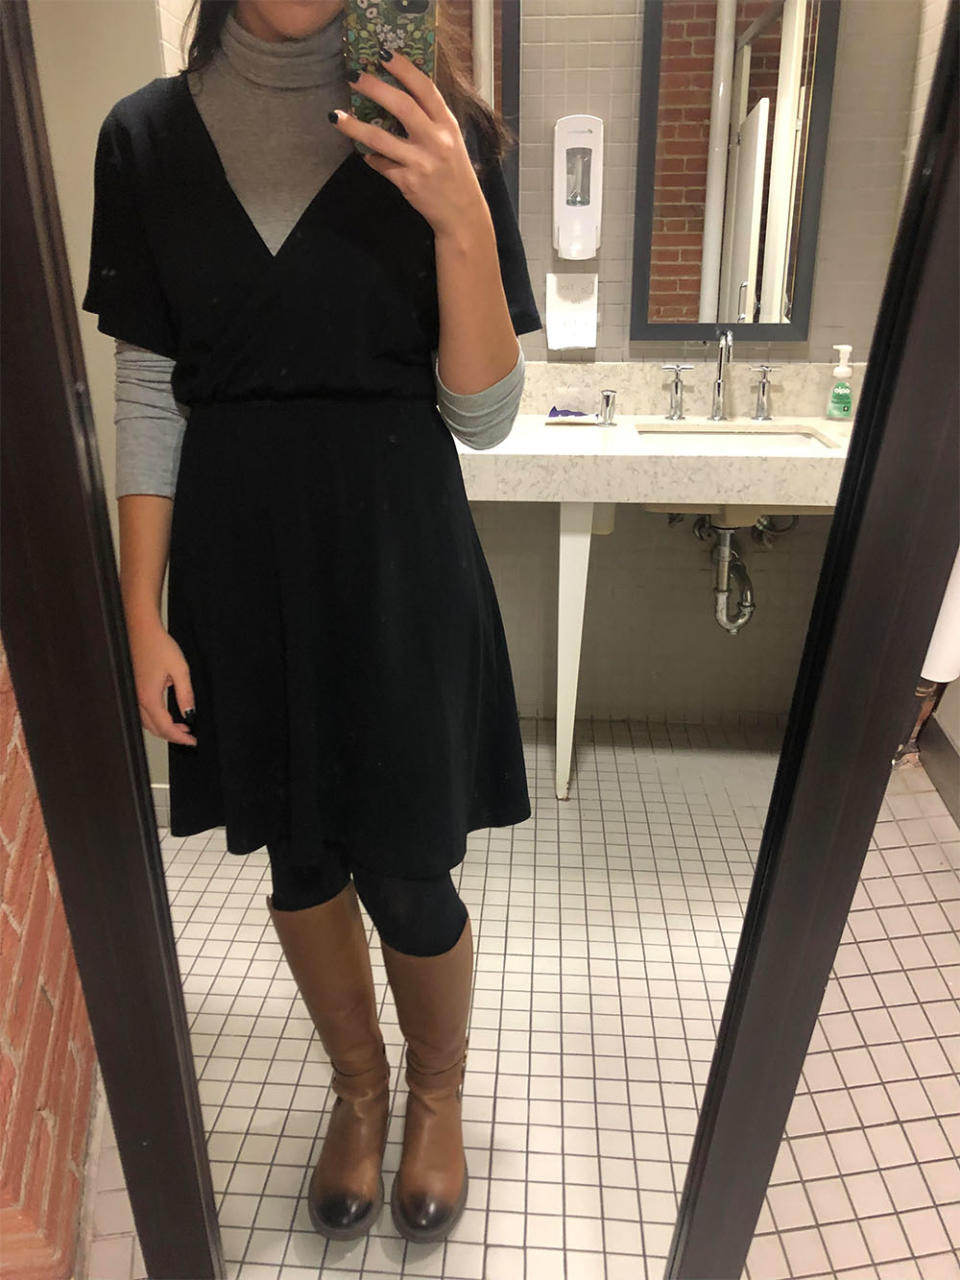 On day 5, instead of keeping warm with a cardigan or sweater, I layered a lightweight turtleneck underneath the dress.